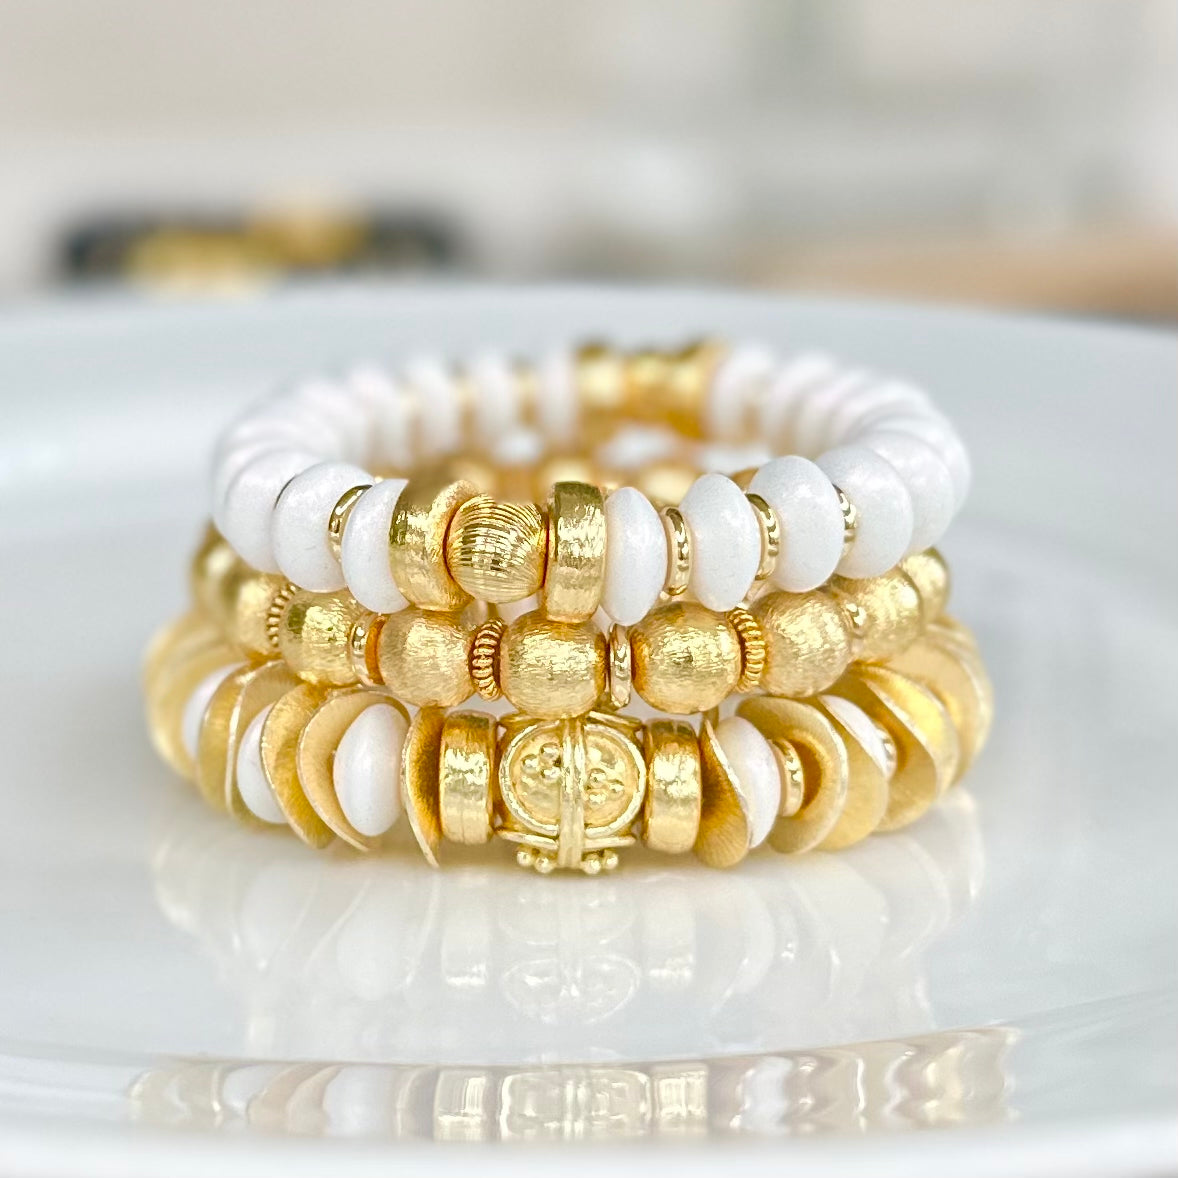 GOLD WAVY DISC AND WHITE STATEMENT BRACELET